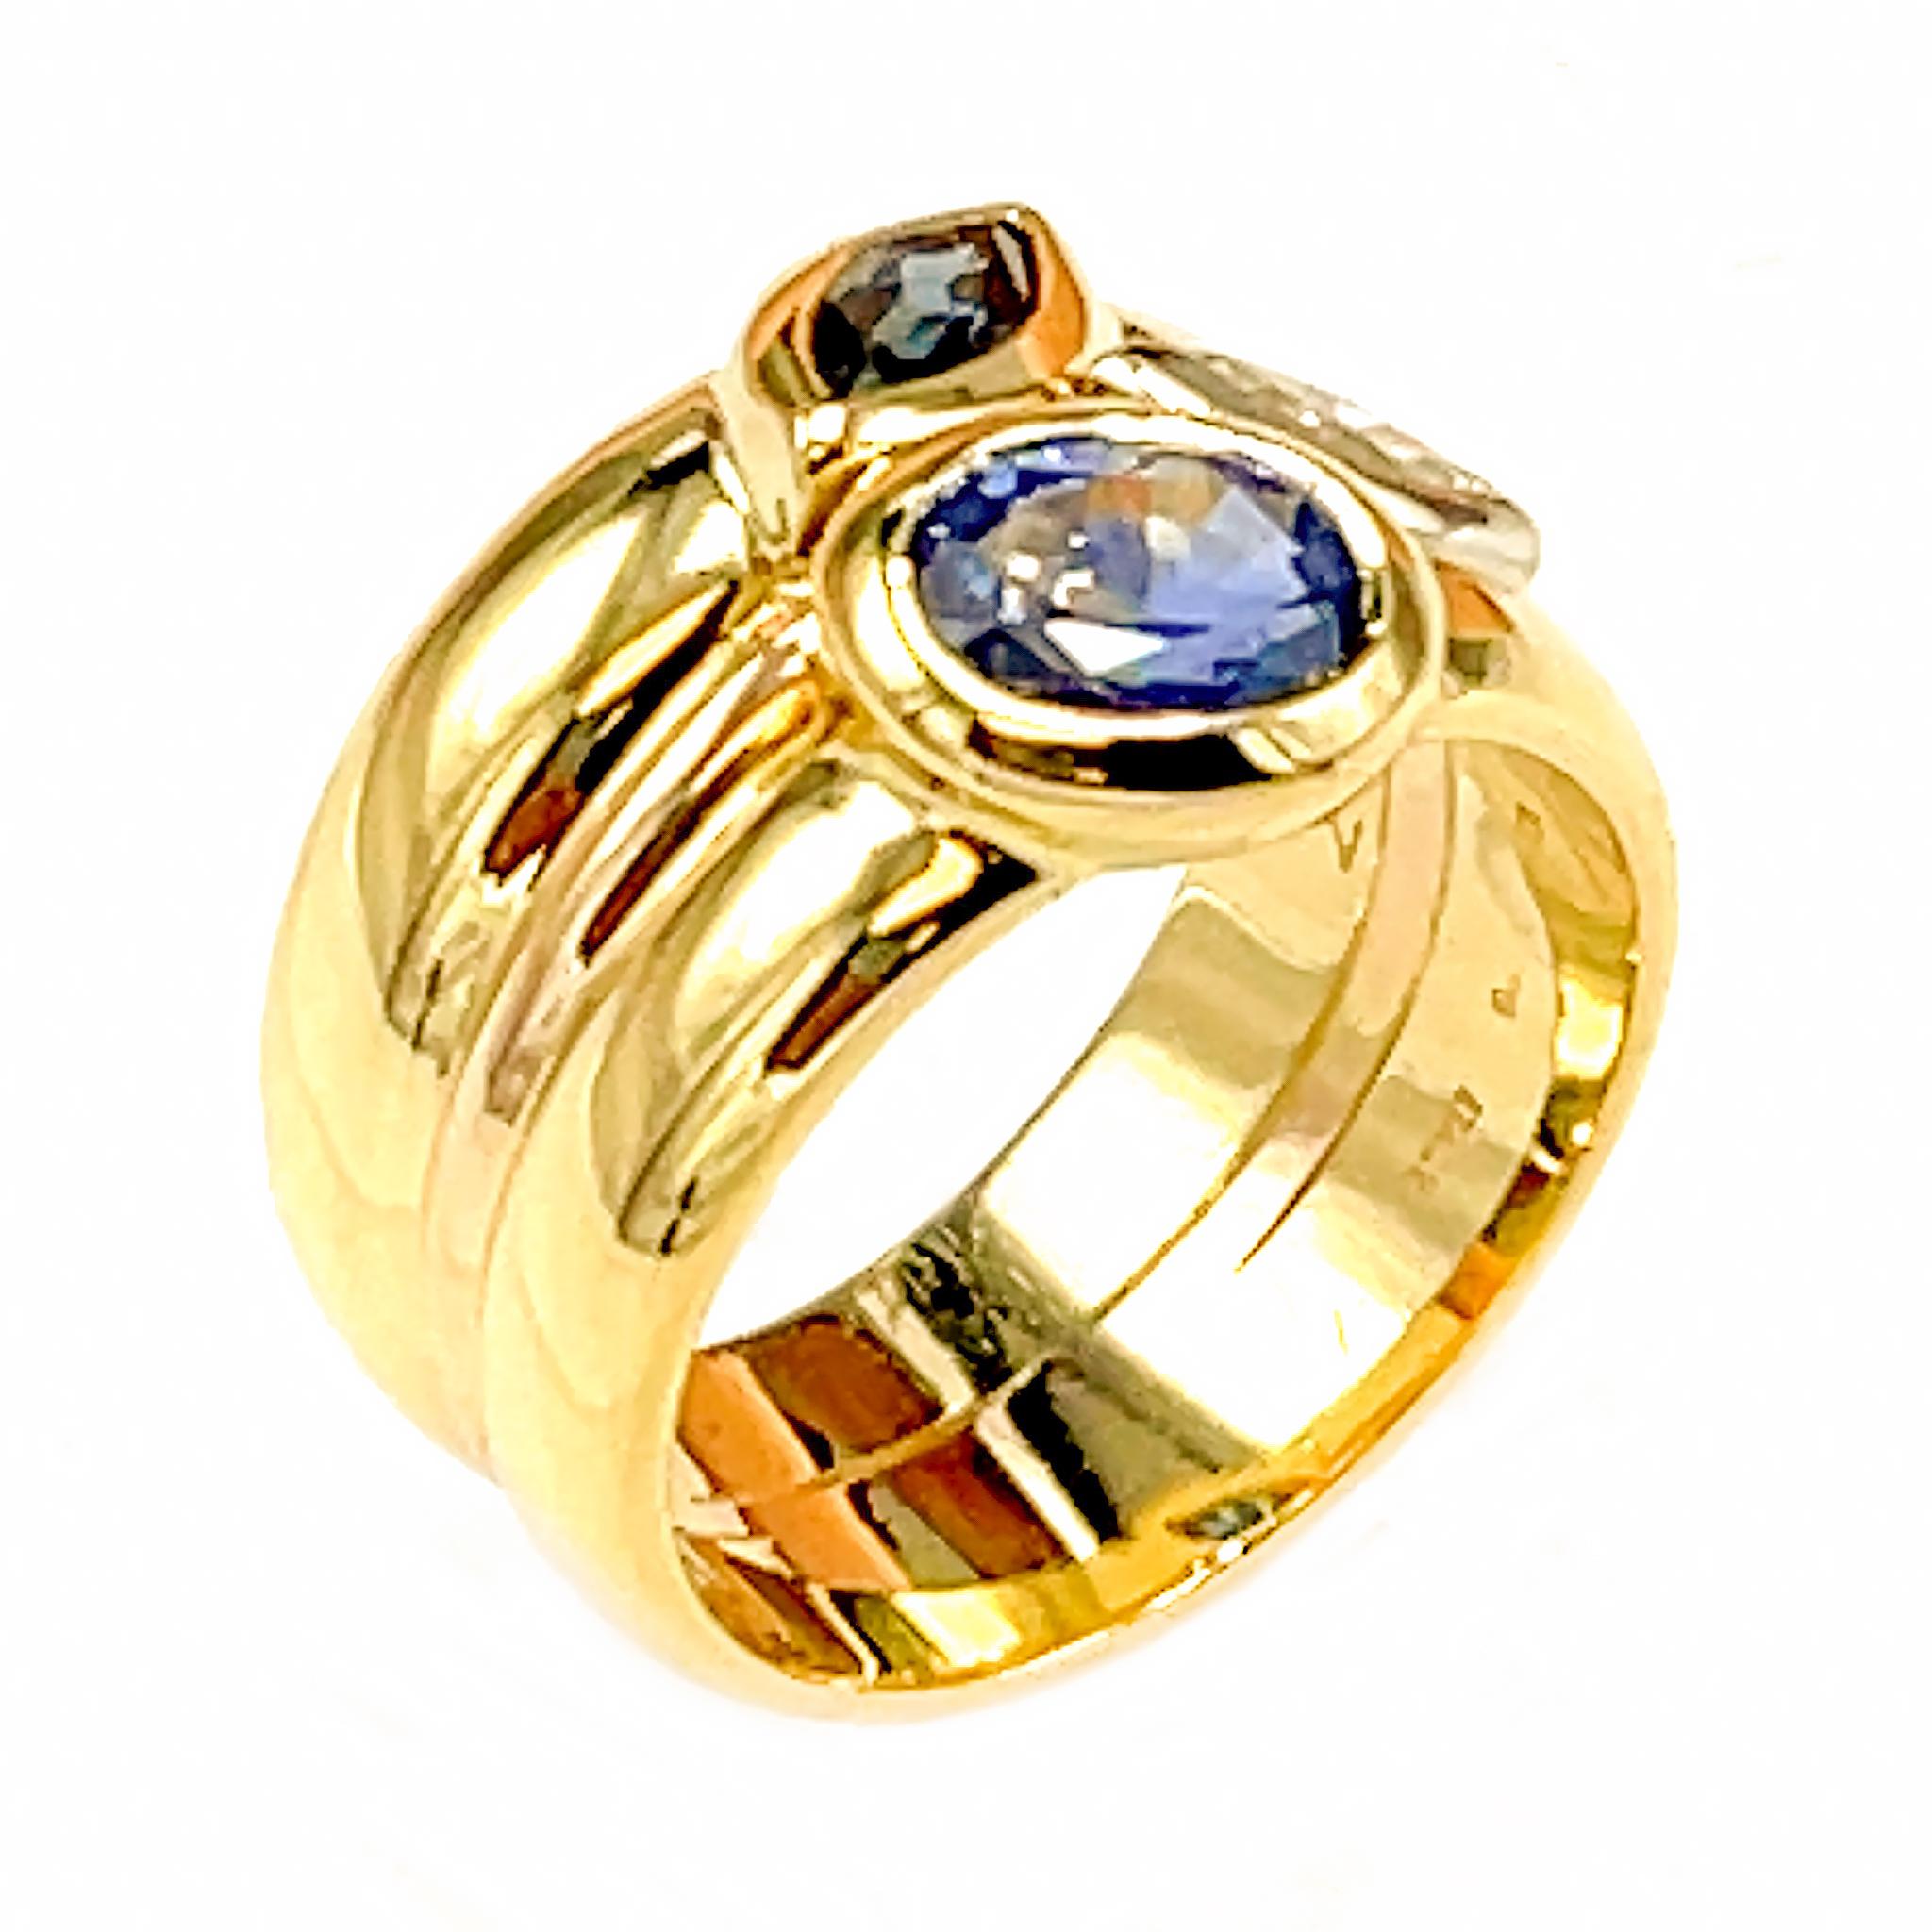 18k Yellow Gold
Sapphire: 0.70 tcw
Diamond: 0.14 ct twd
Ring Size: 6.25
Total Weight: 10.8 grams